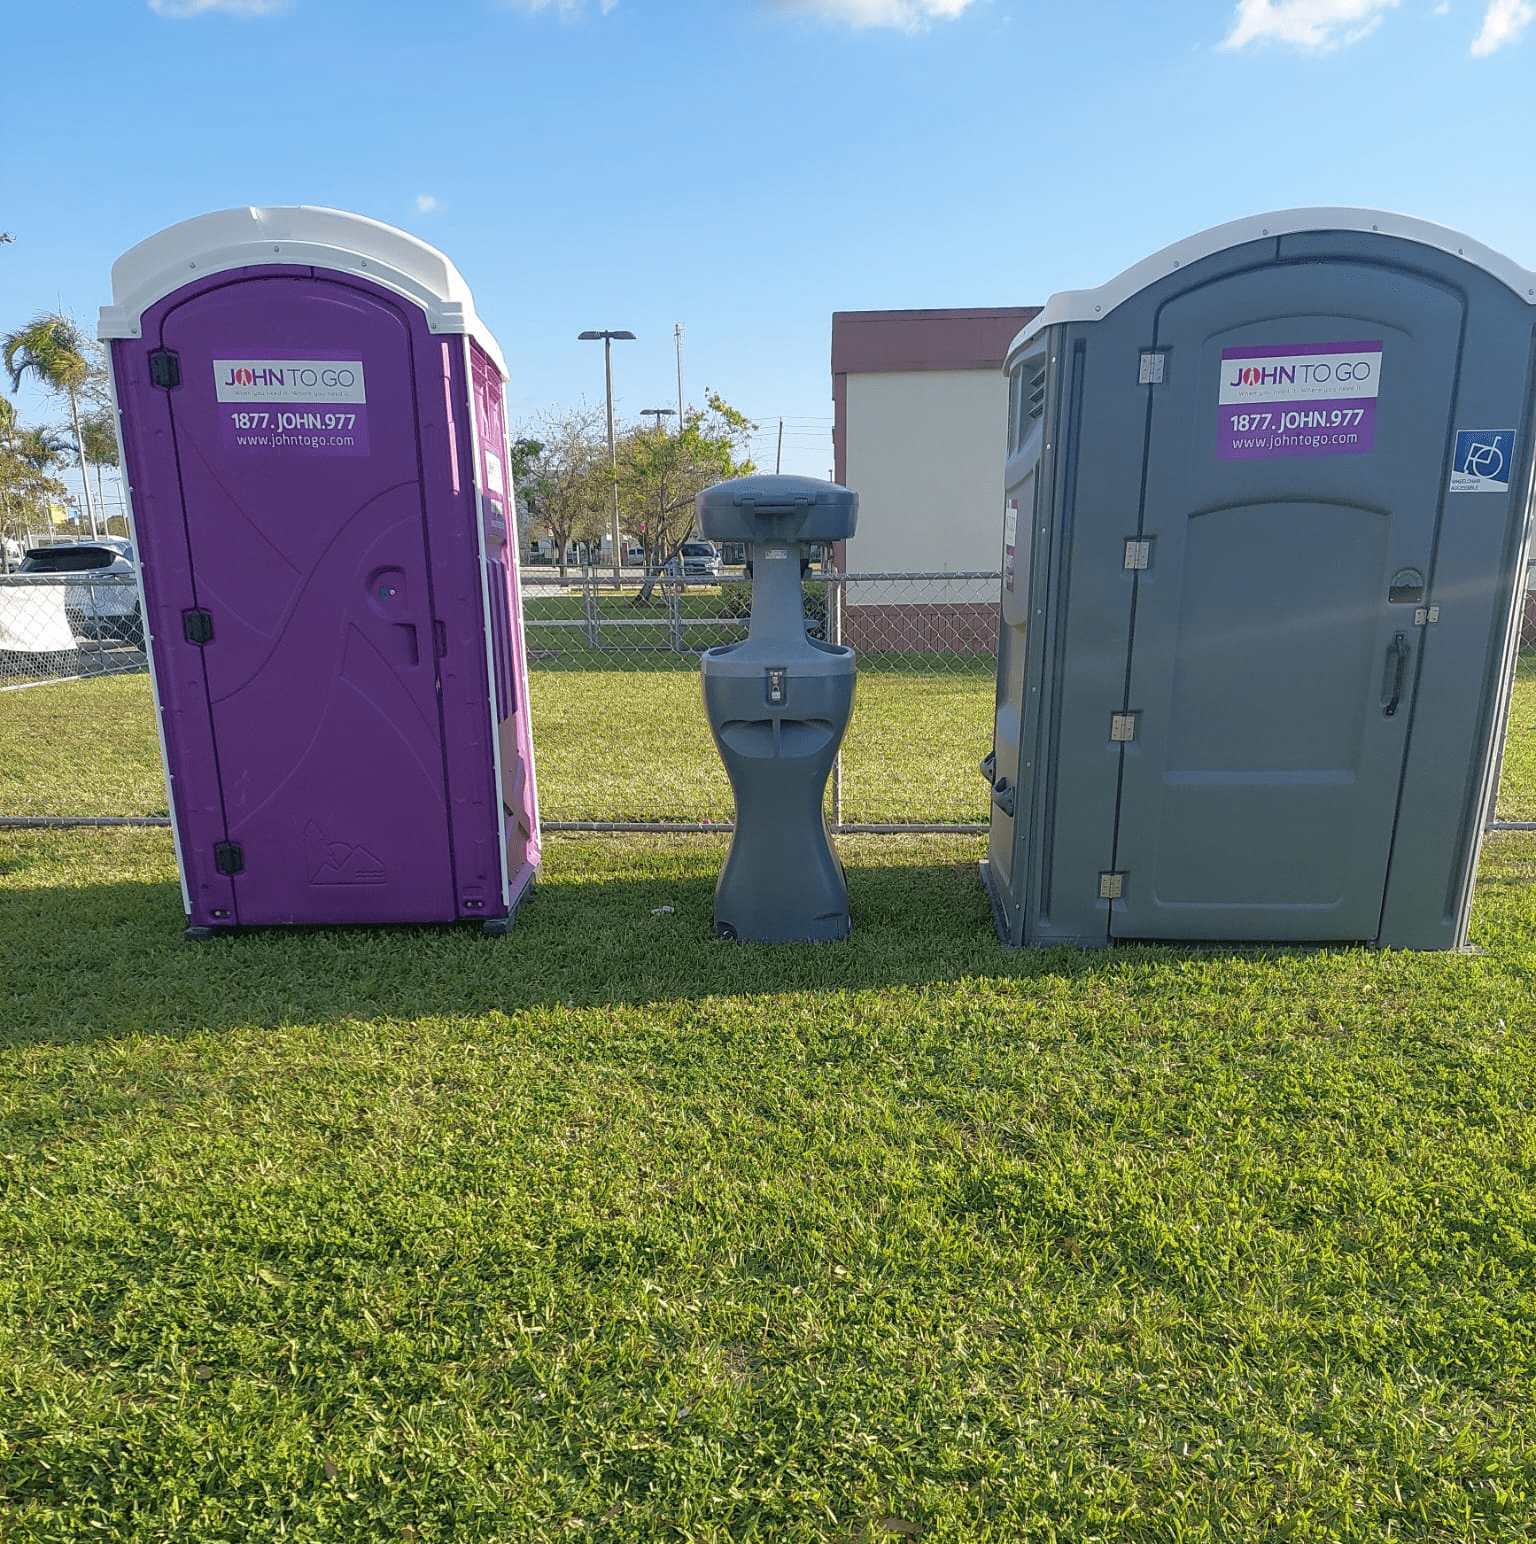 Porta potty Suffolk sanitation for an outdoor event